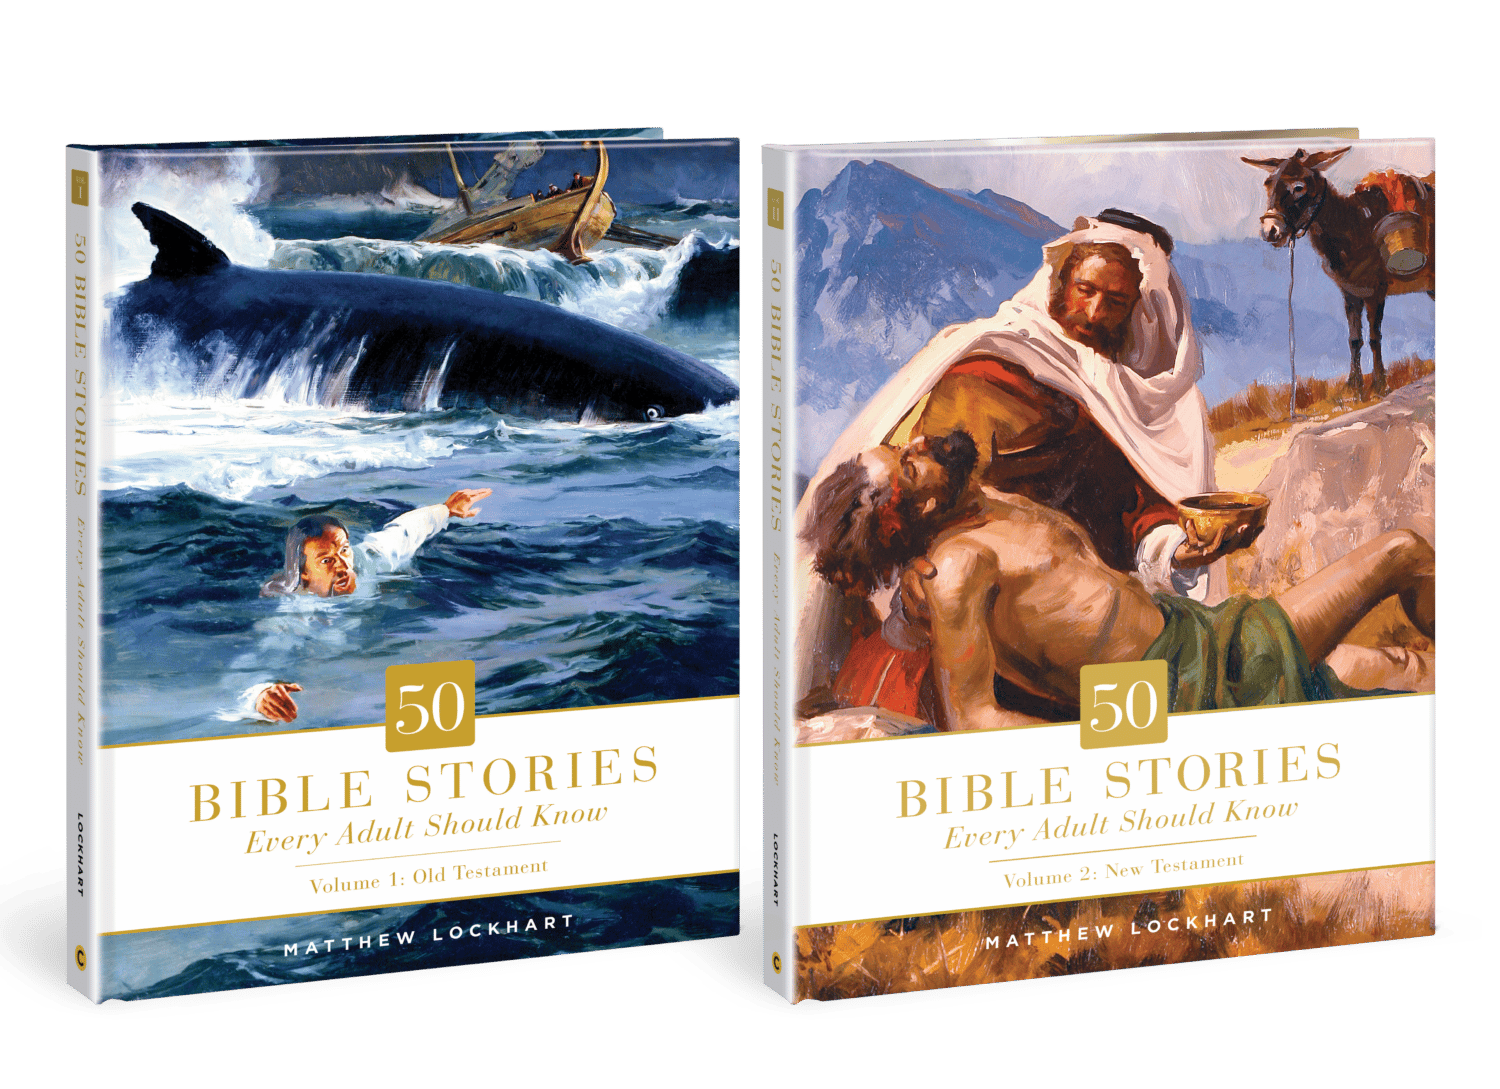 50 Bible Stories Every Adult Should Know, Available for Old and New Testament.